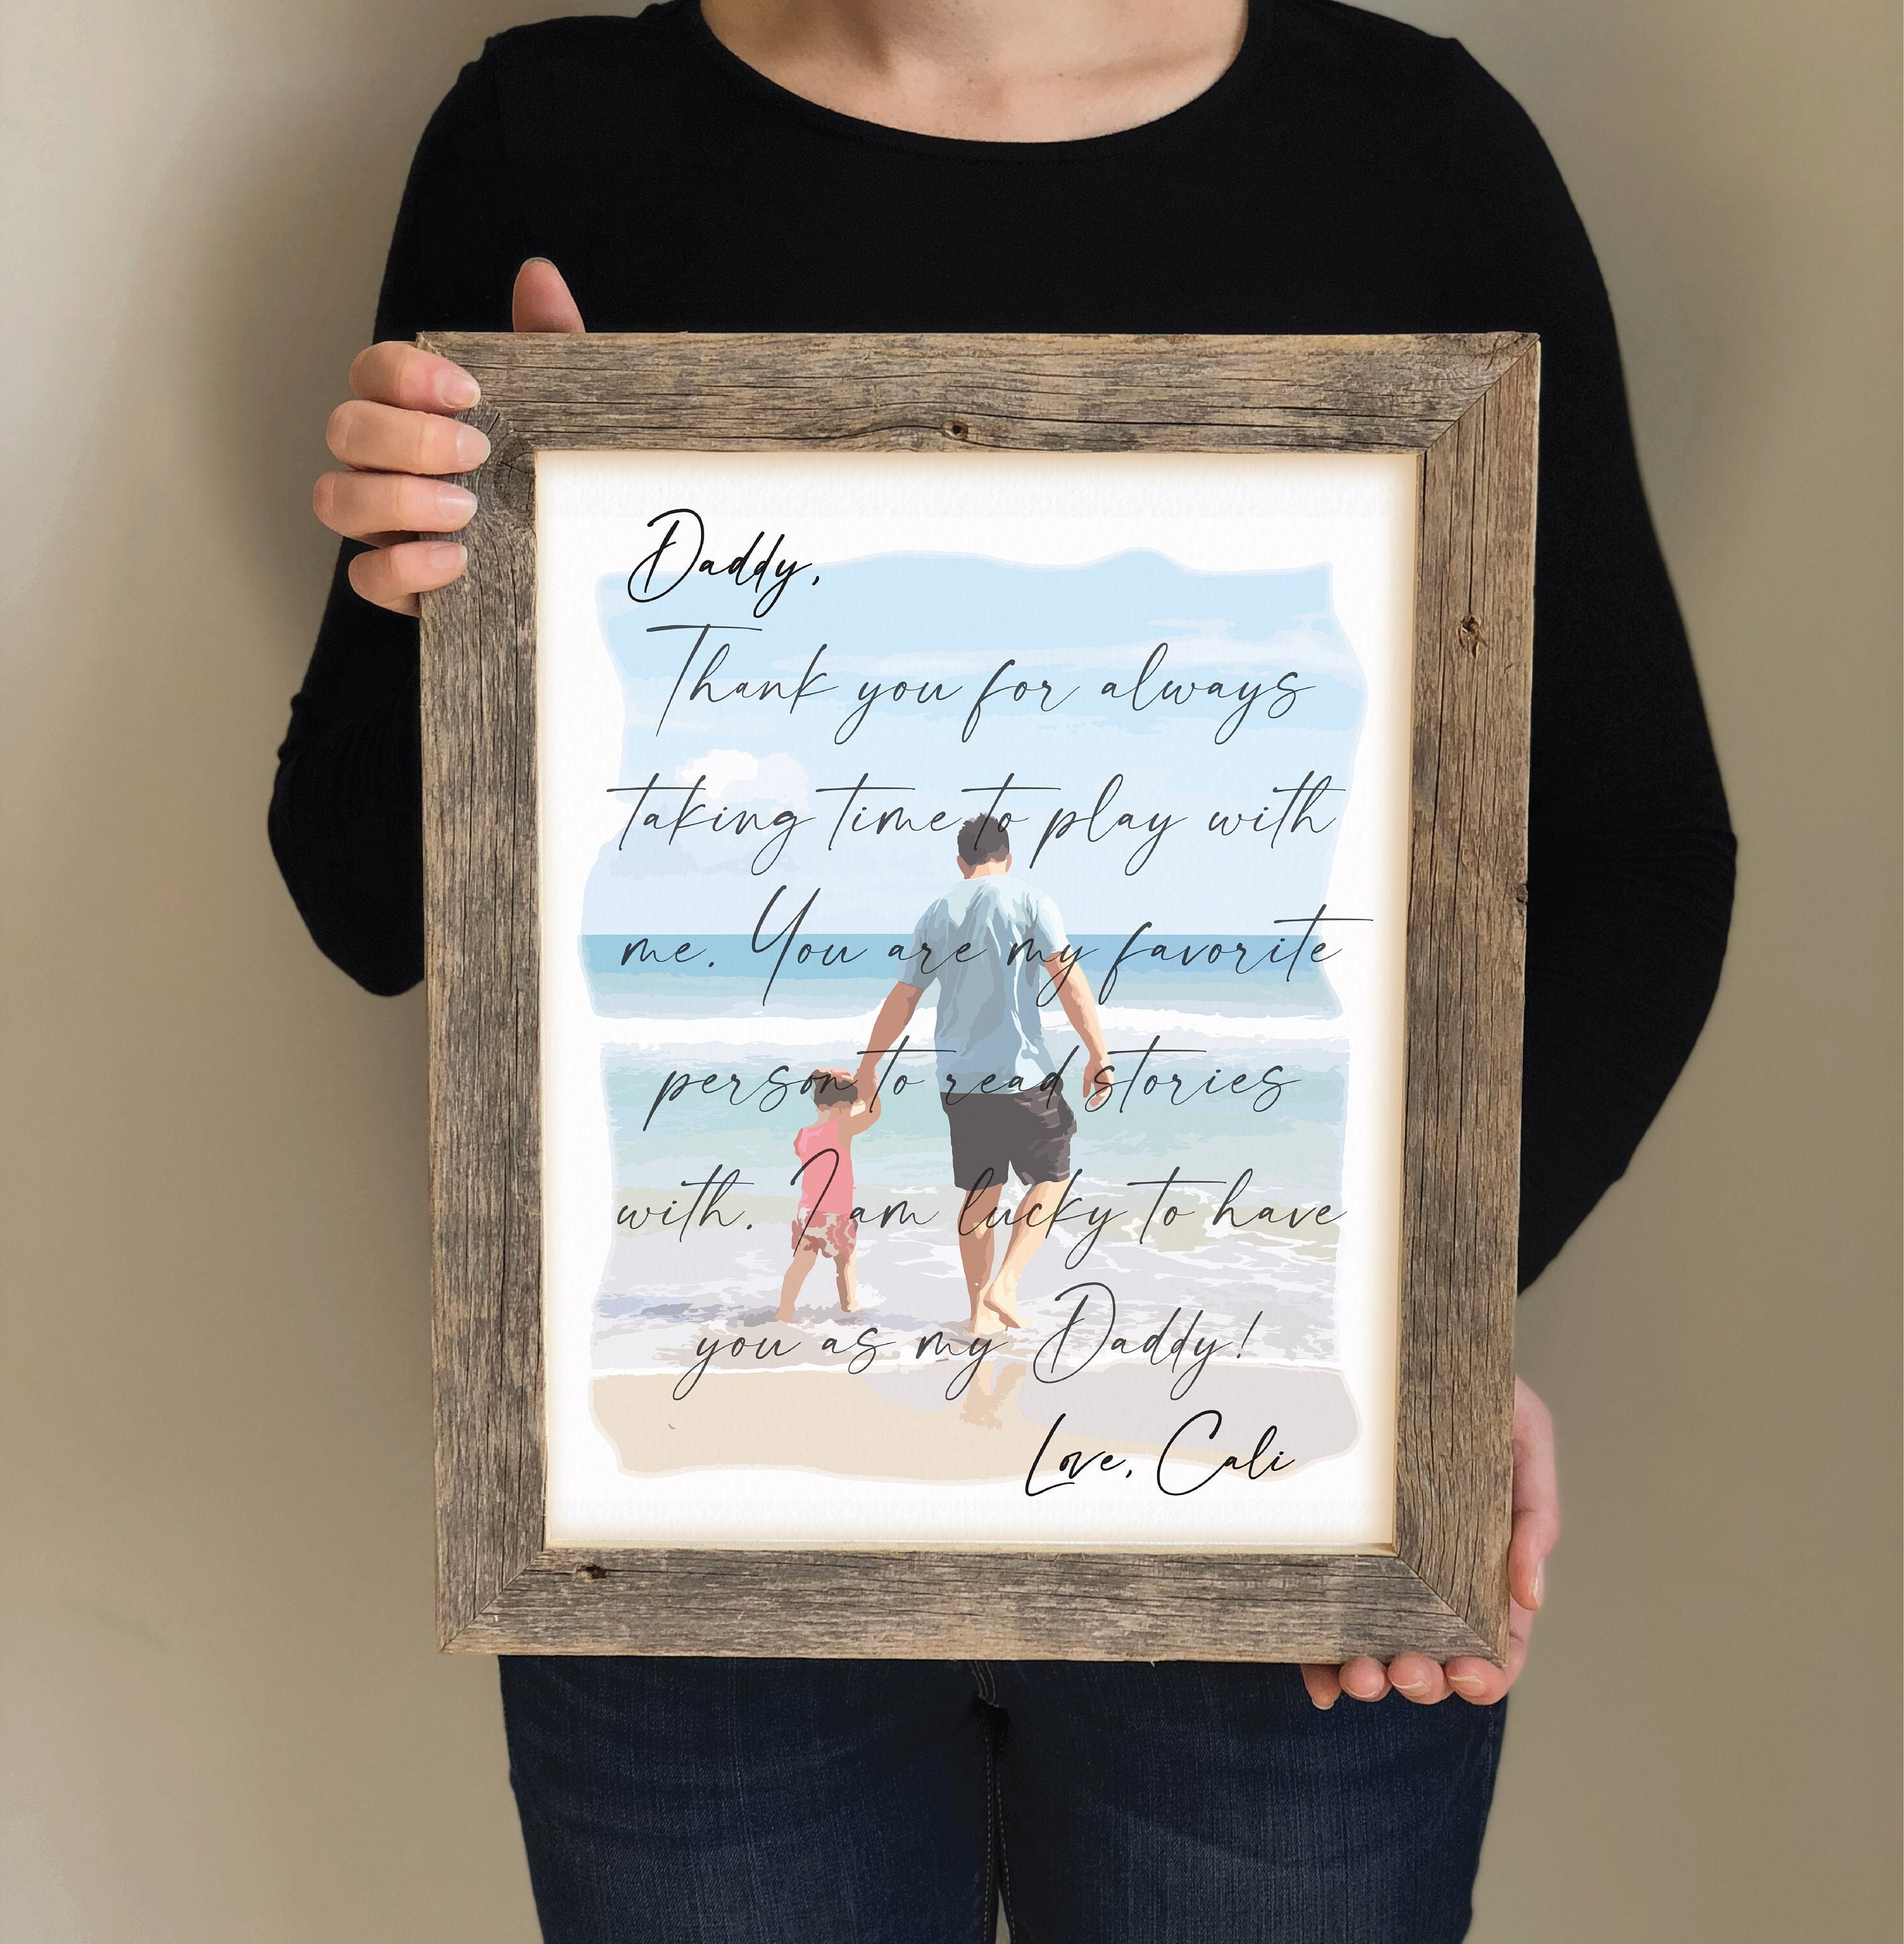 Christmas Gift for Parents, Gifts for in Laws, Meaningful Gifts for Mom and  Dad From Children, Personalized Gifts, Holiday Gifts for Parents 